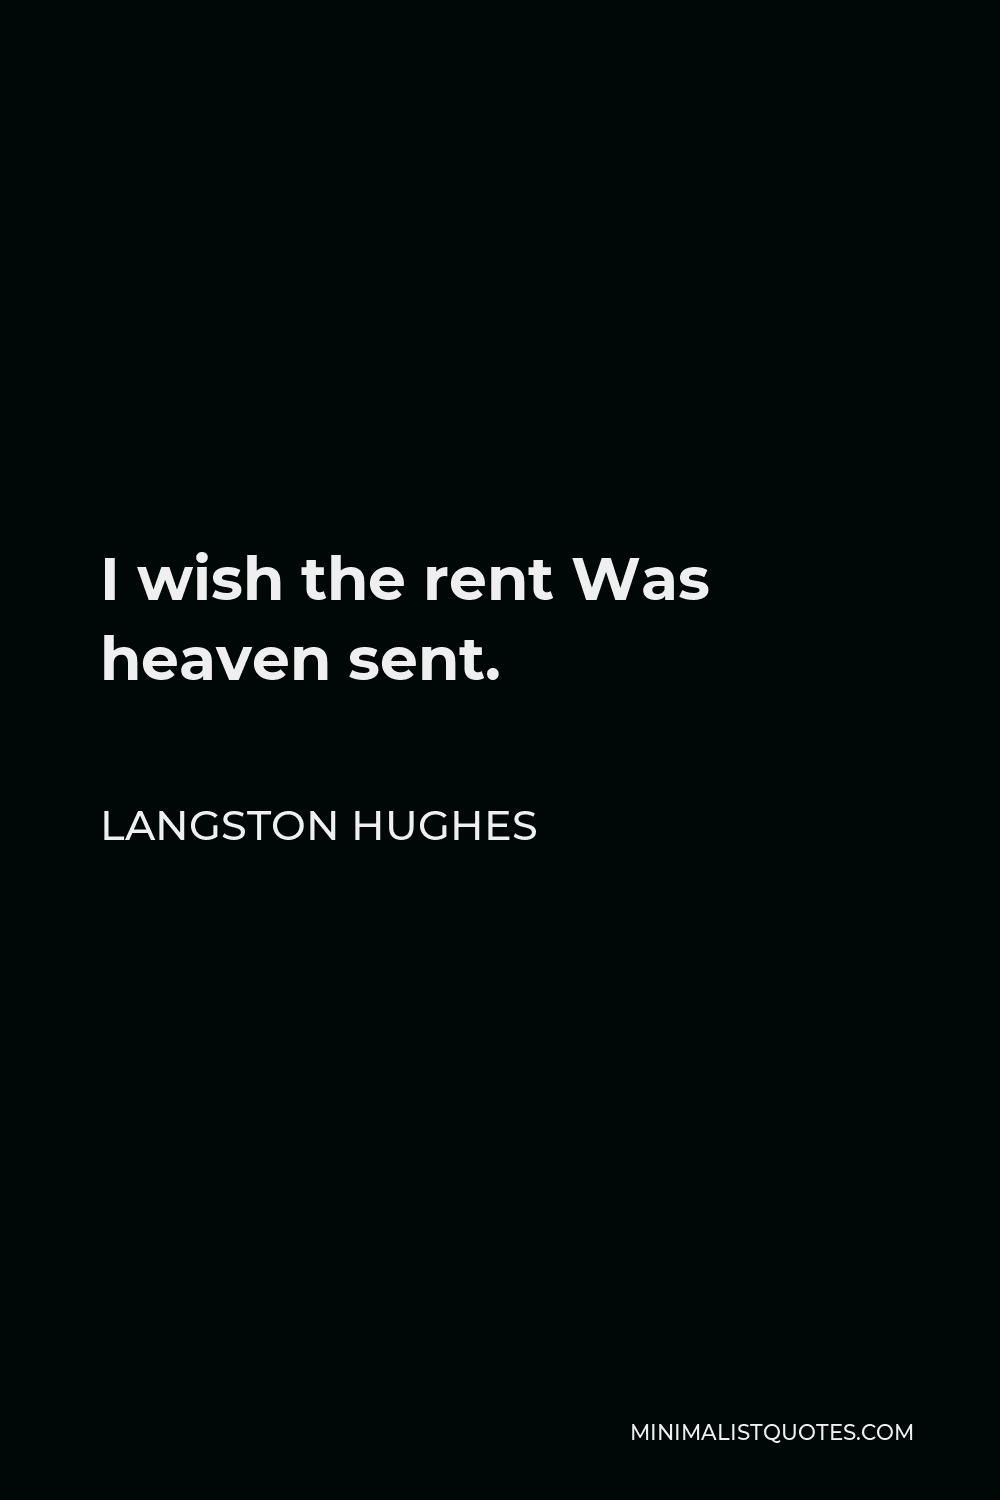 Langston Hughes Quote - I wish the rent Was heaven sent.